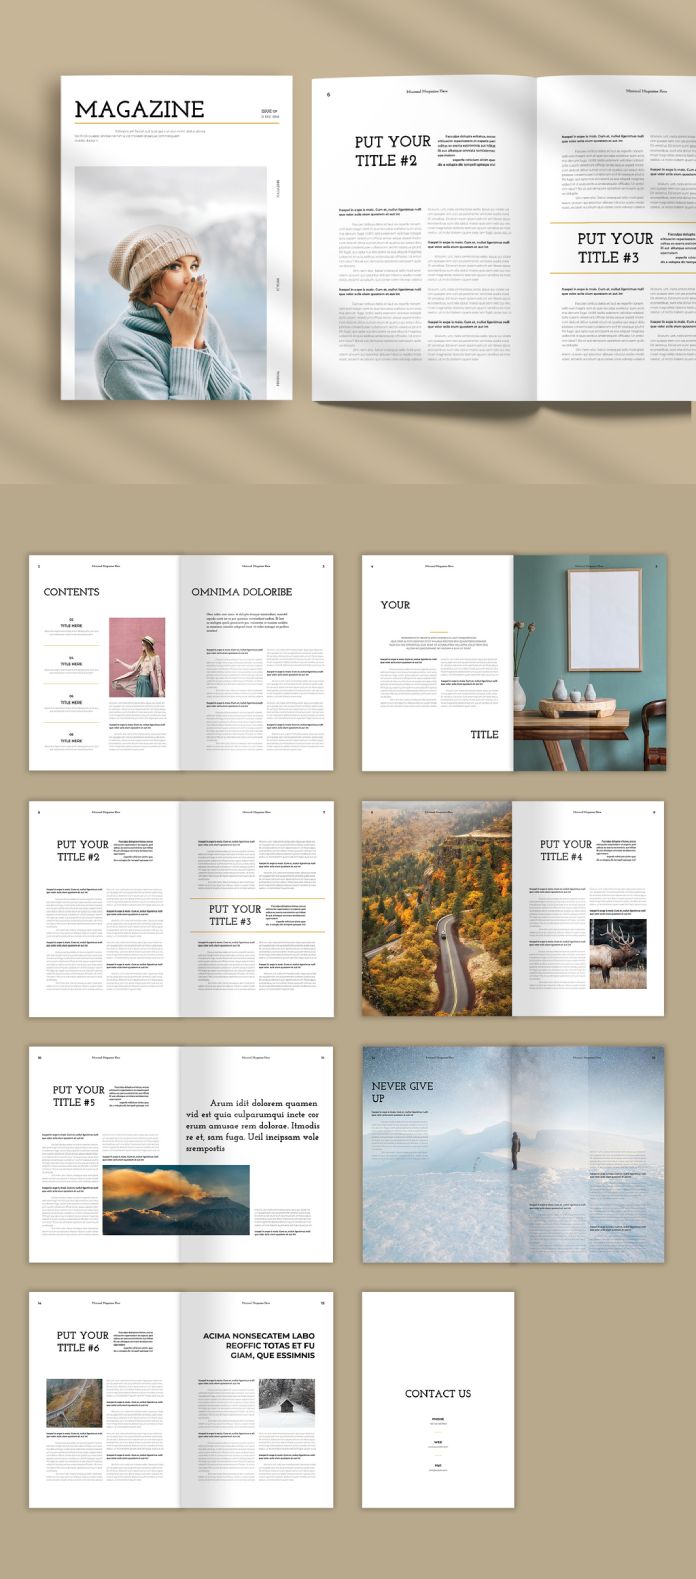 Download a Simple Magazine Template